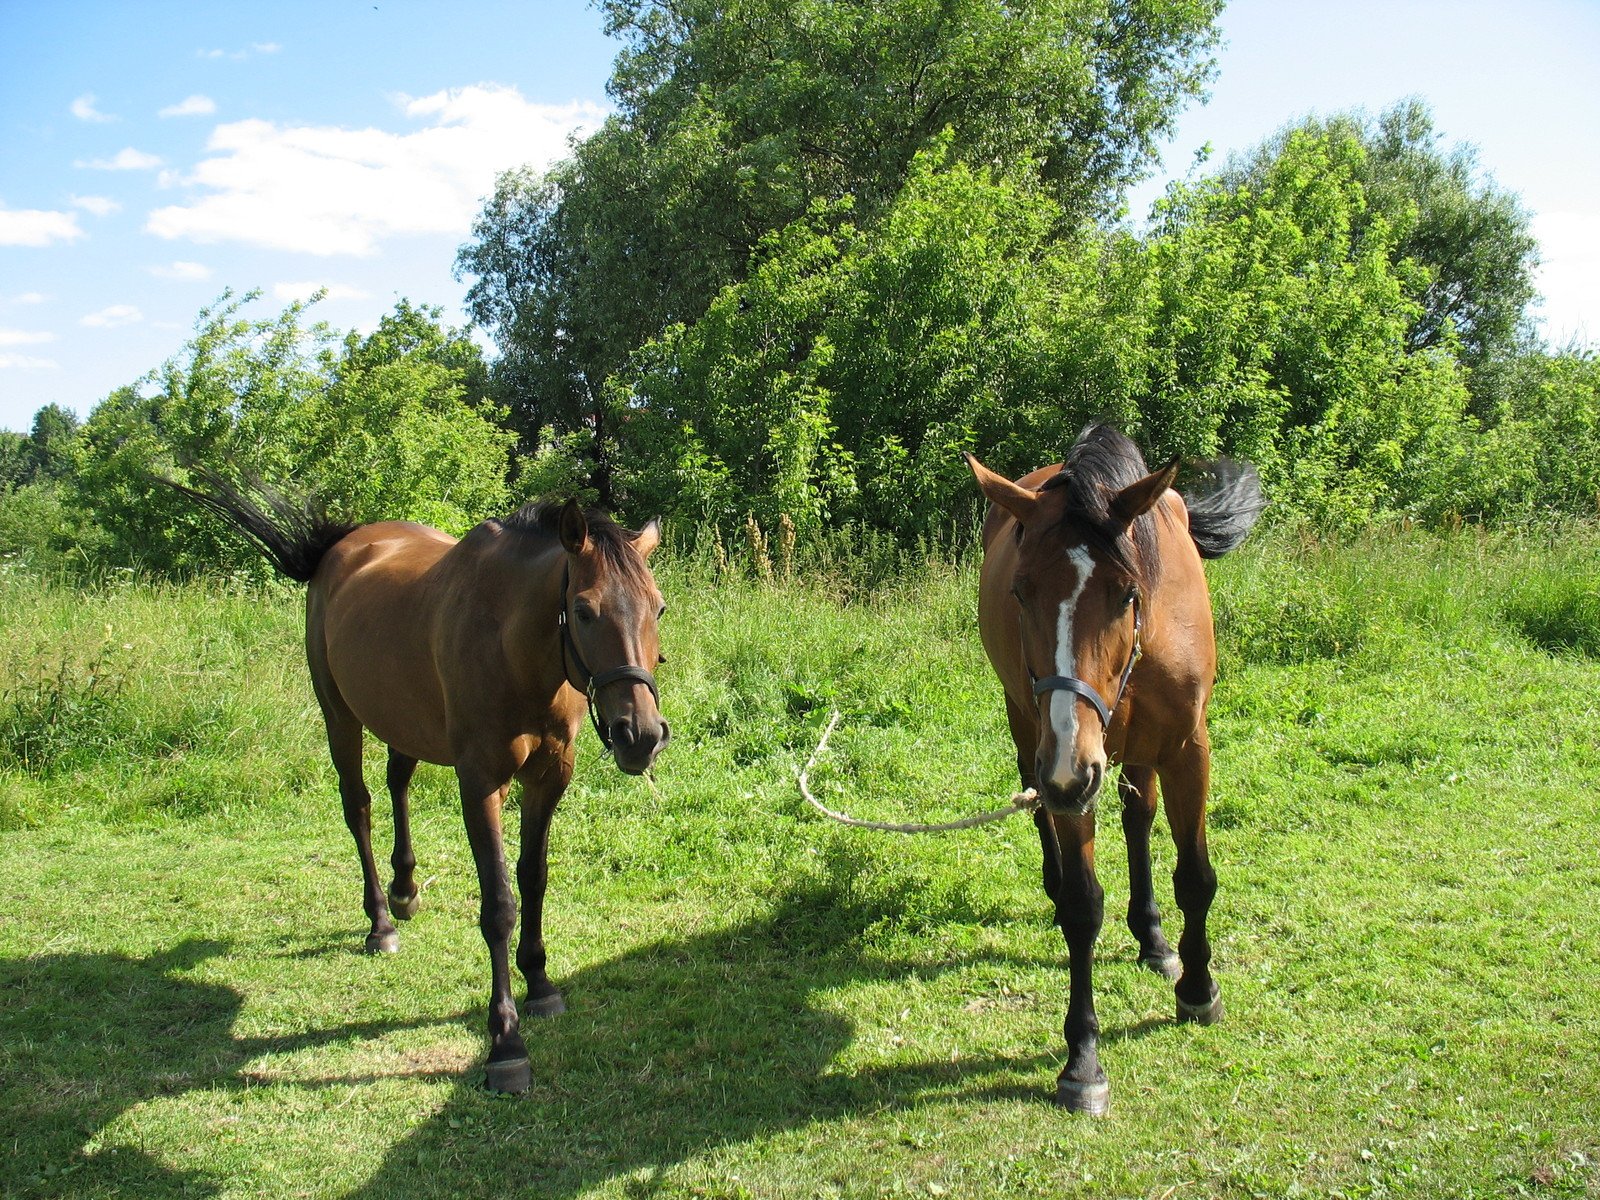 two horses with hats on their heads walk in the grass